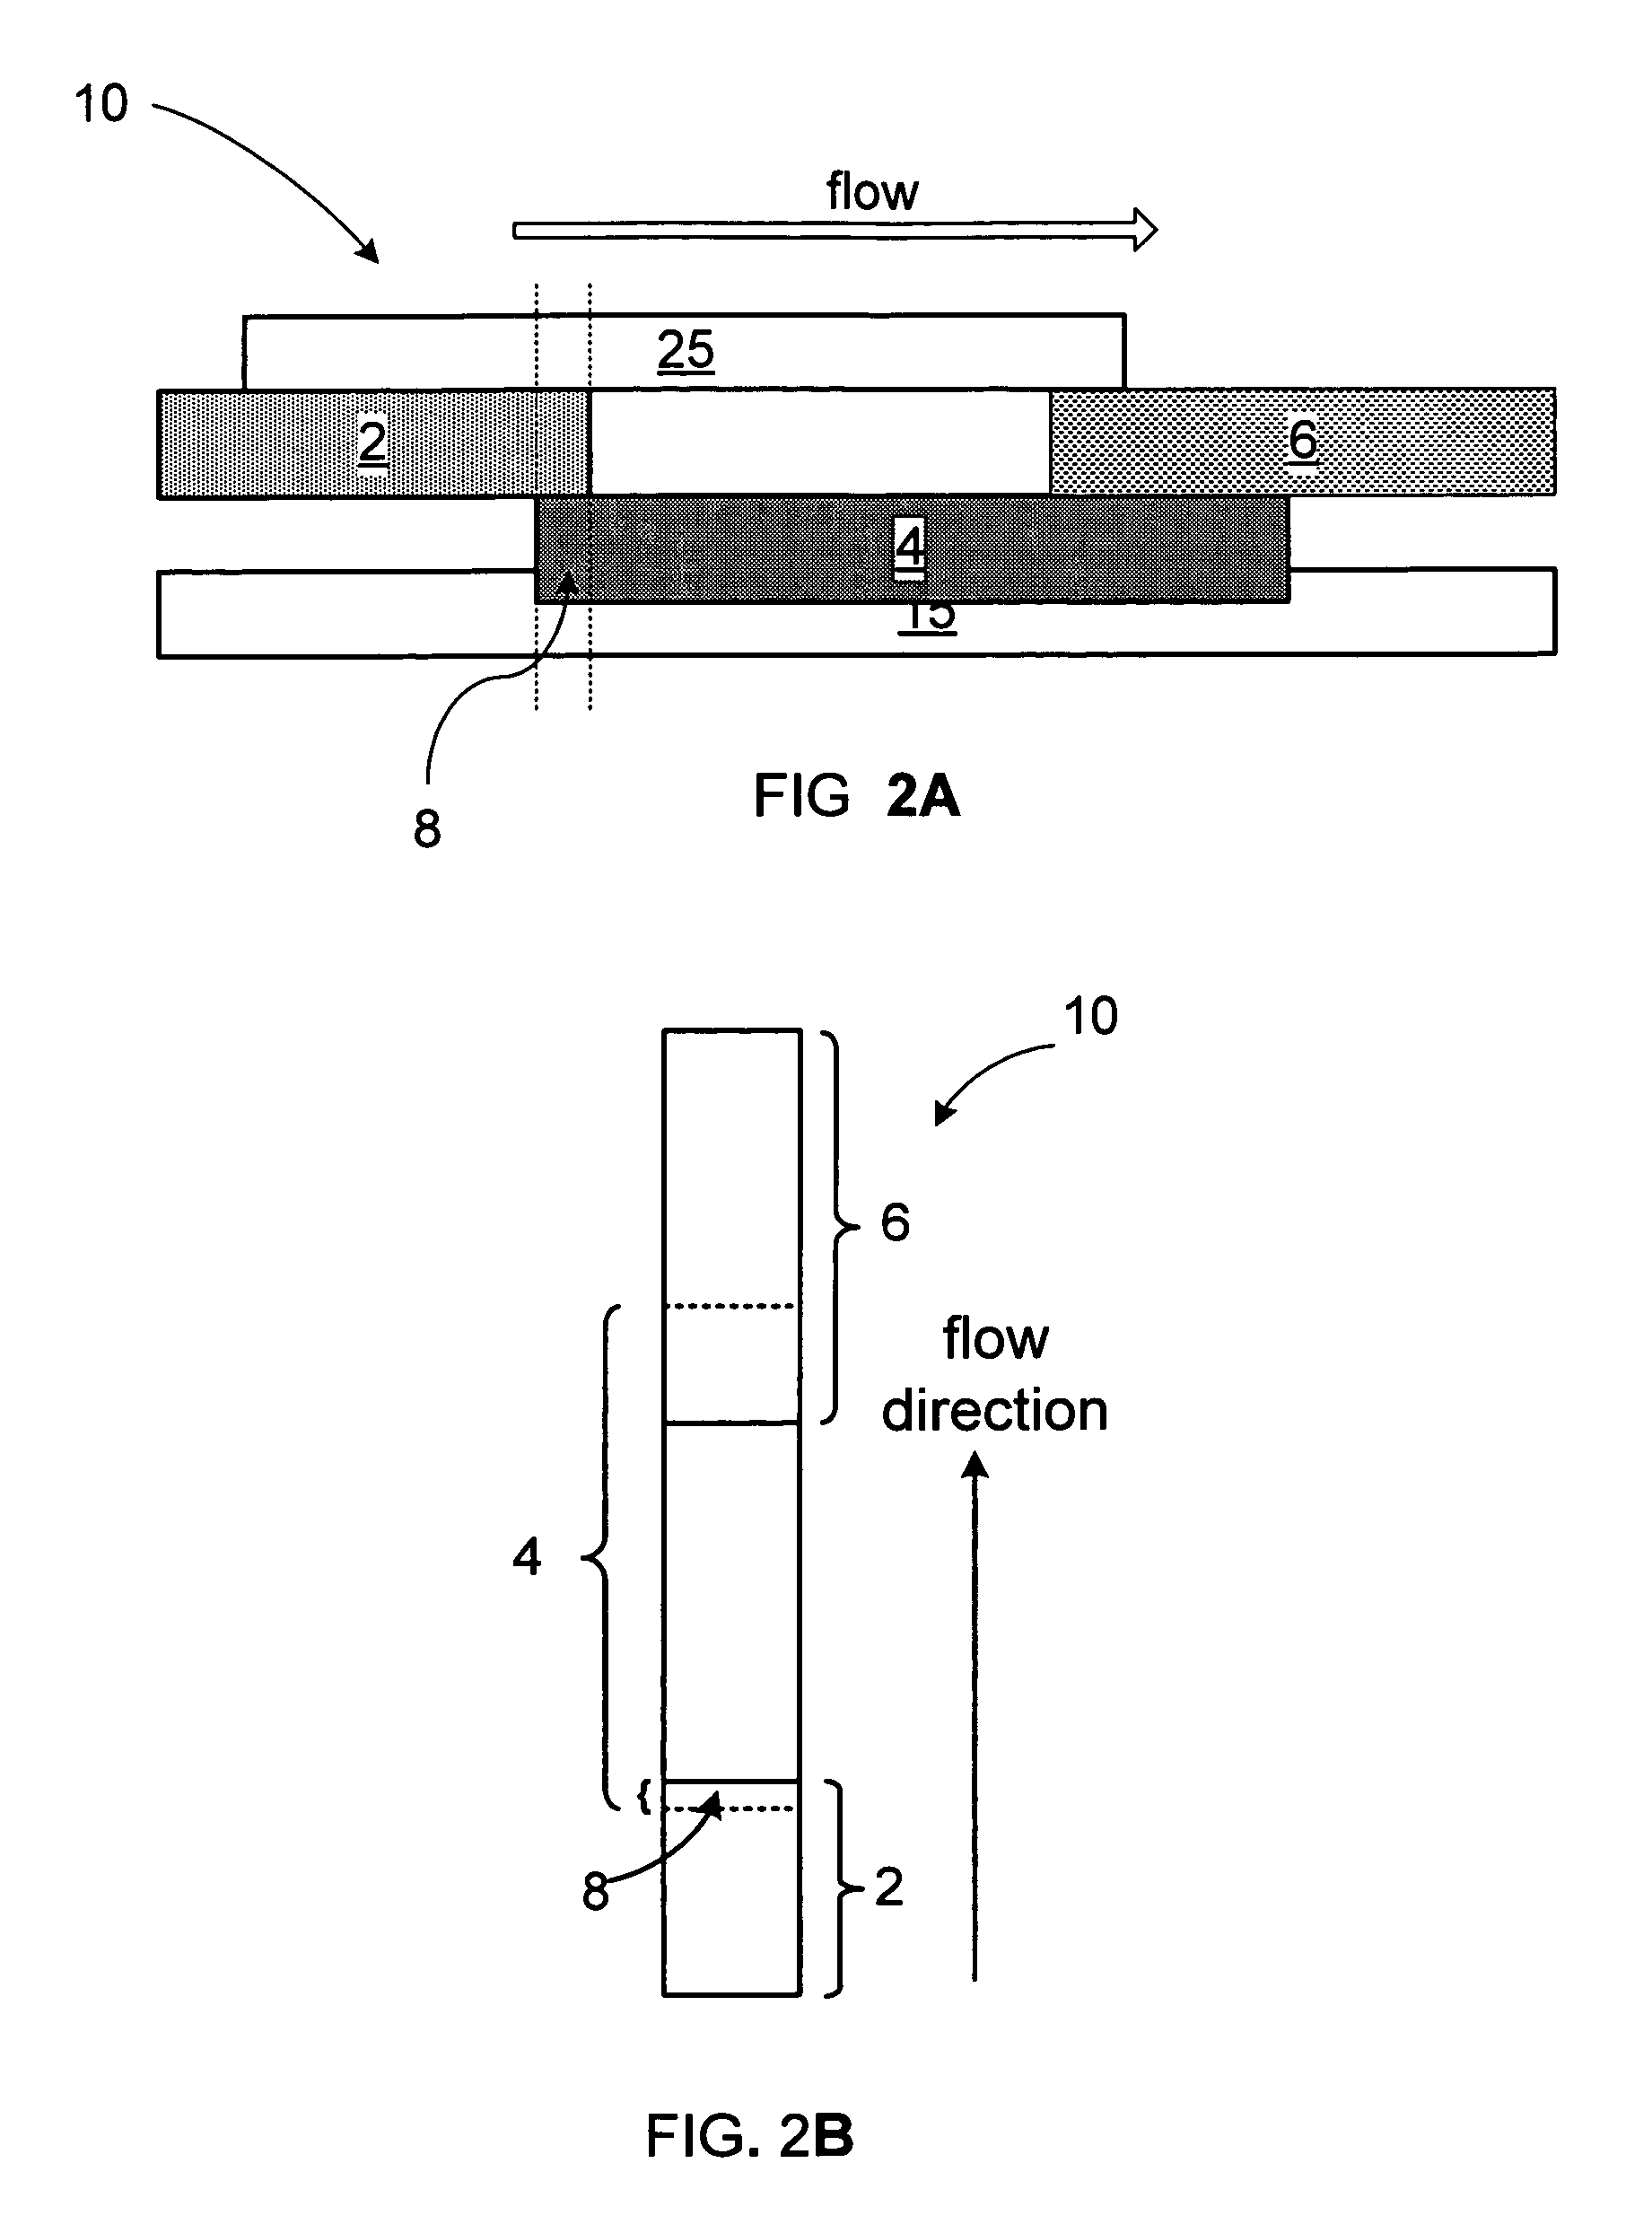 Solid phase test device for sialidase assay